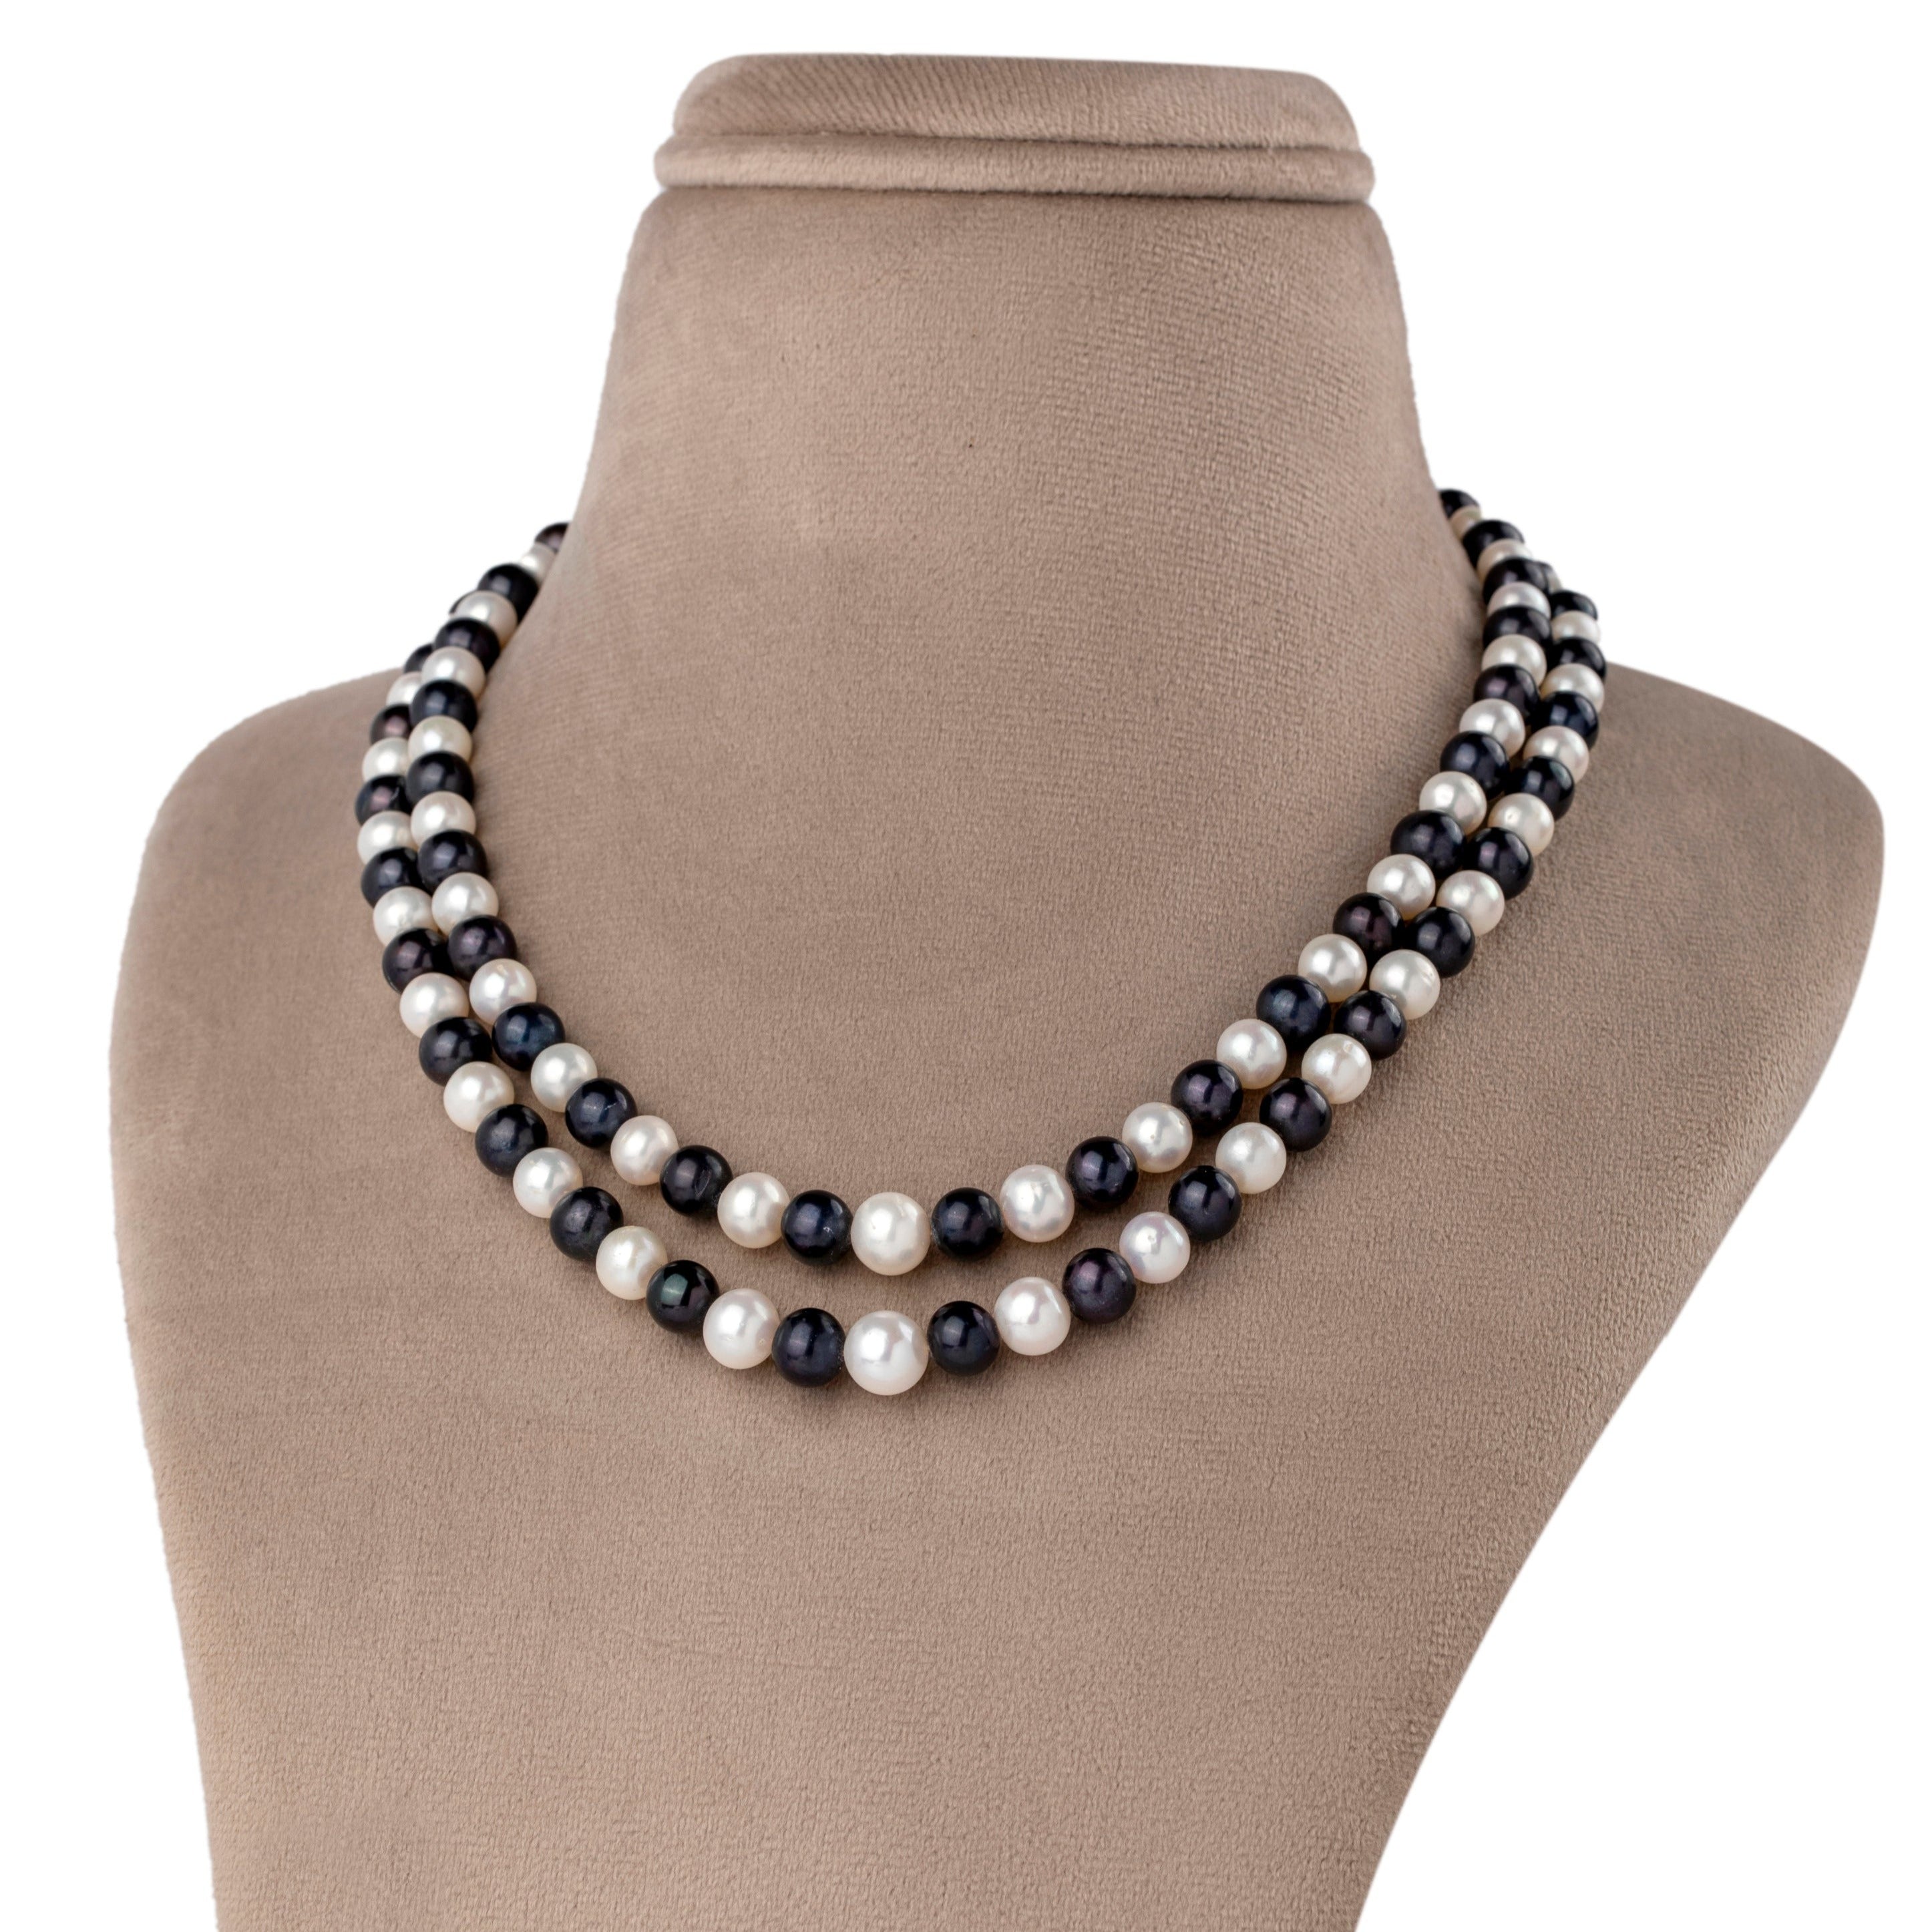 Contrasting Chic Pearl Necklace